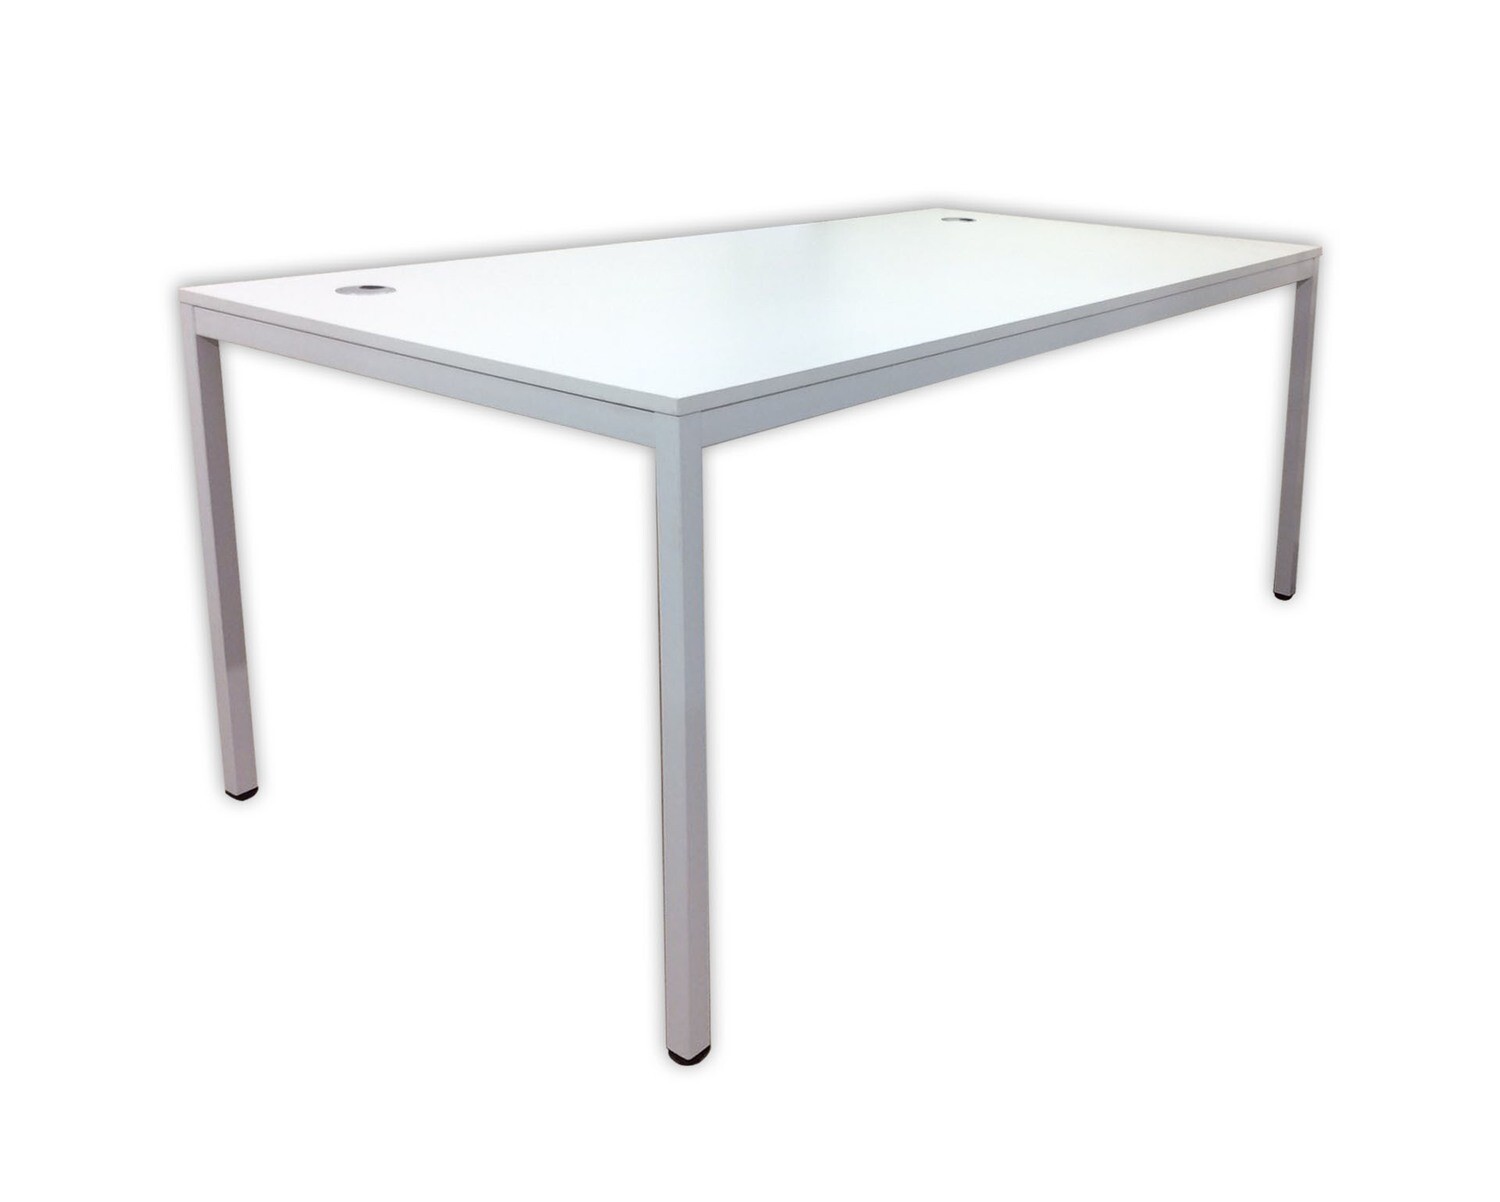 Ofix FYD-A002 (160*80) / FYD-A003 (180*80) Managers Desk (White)